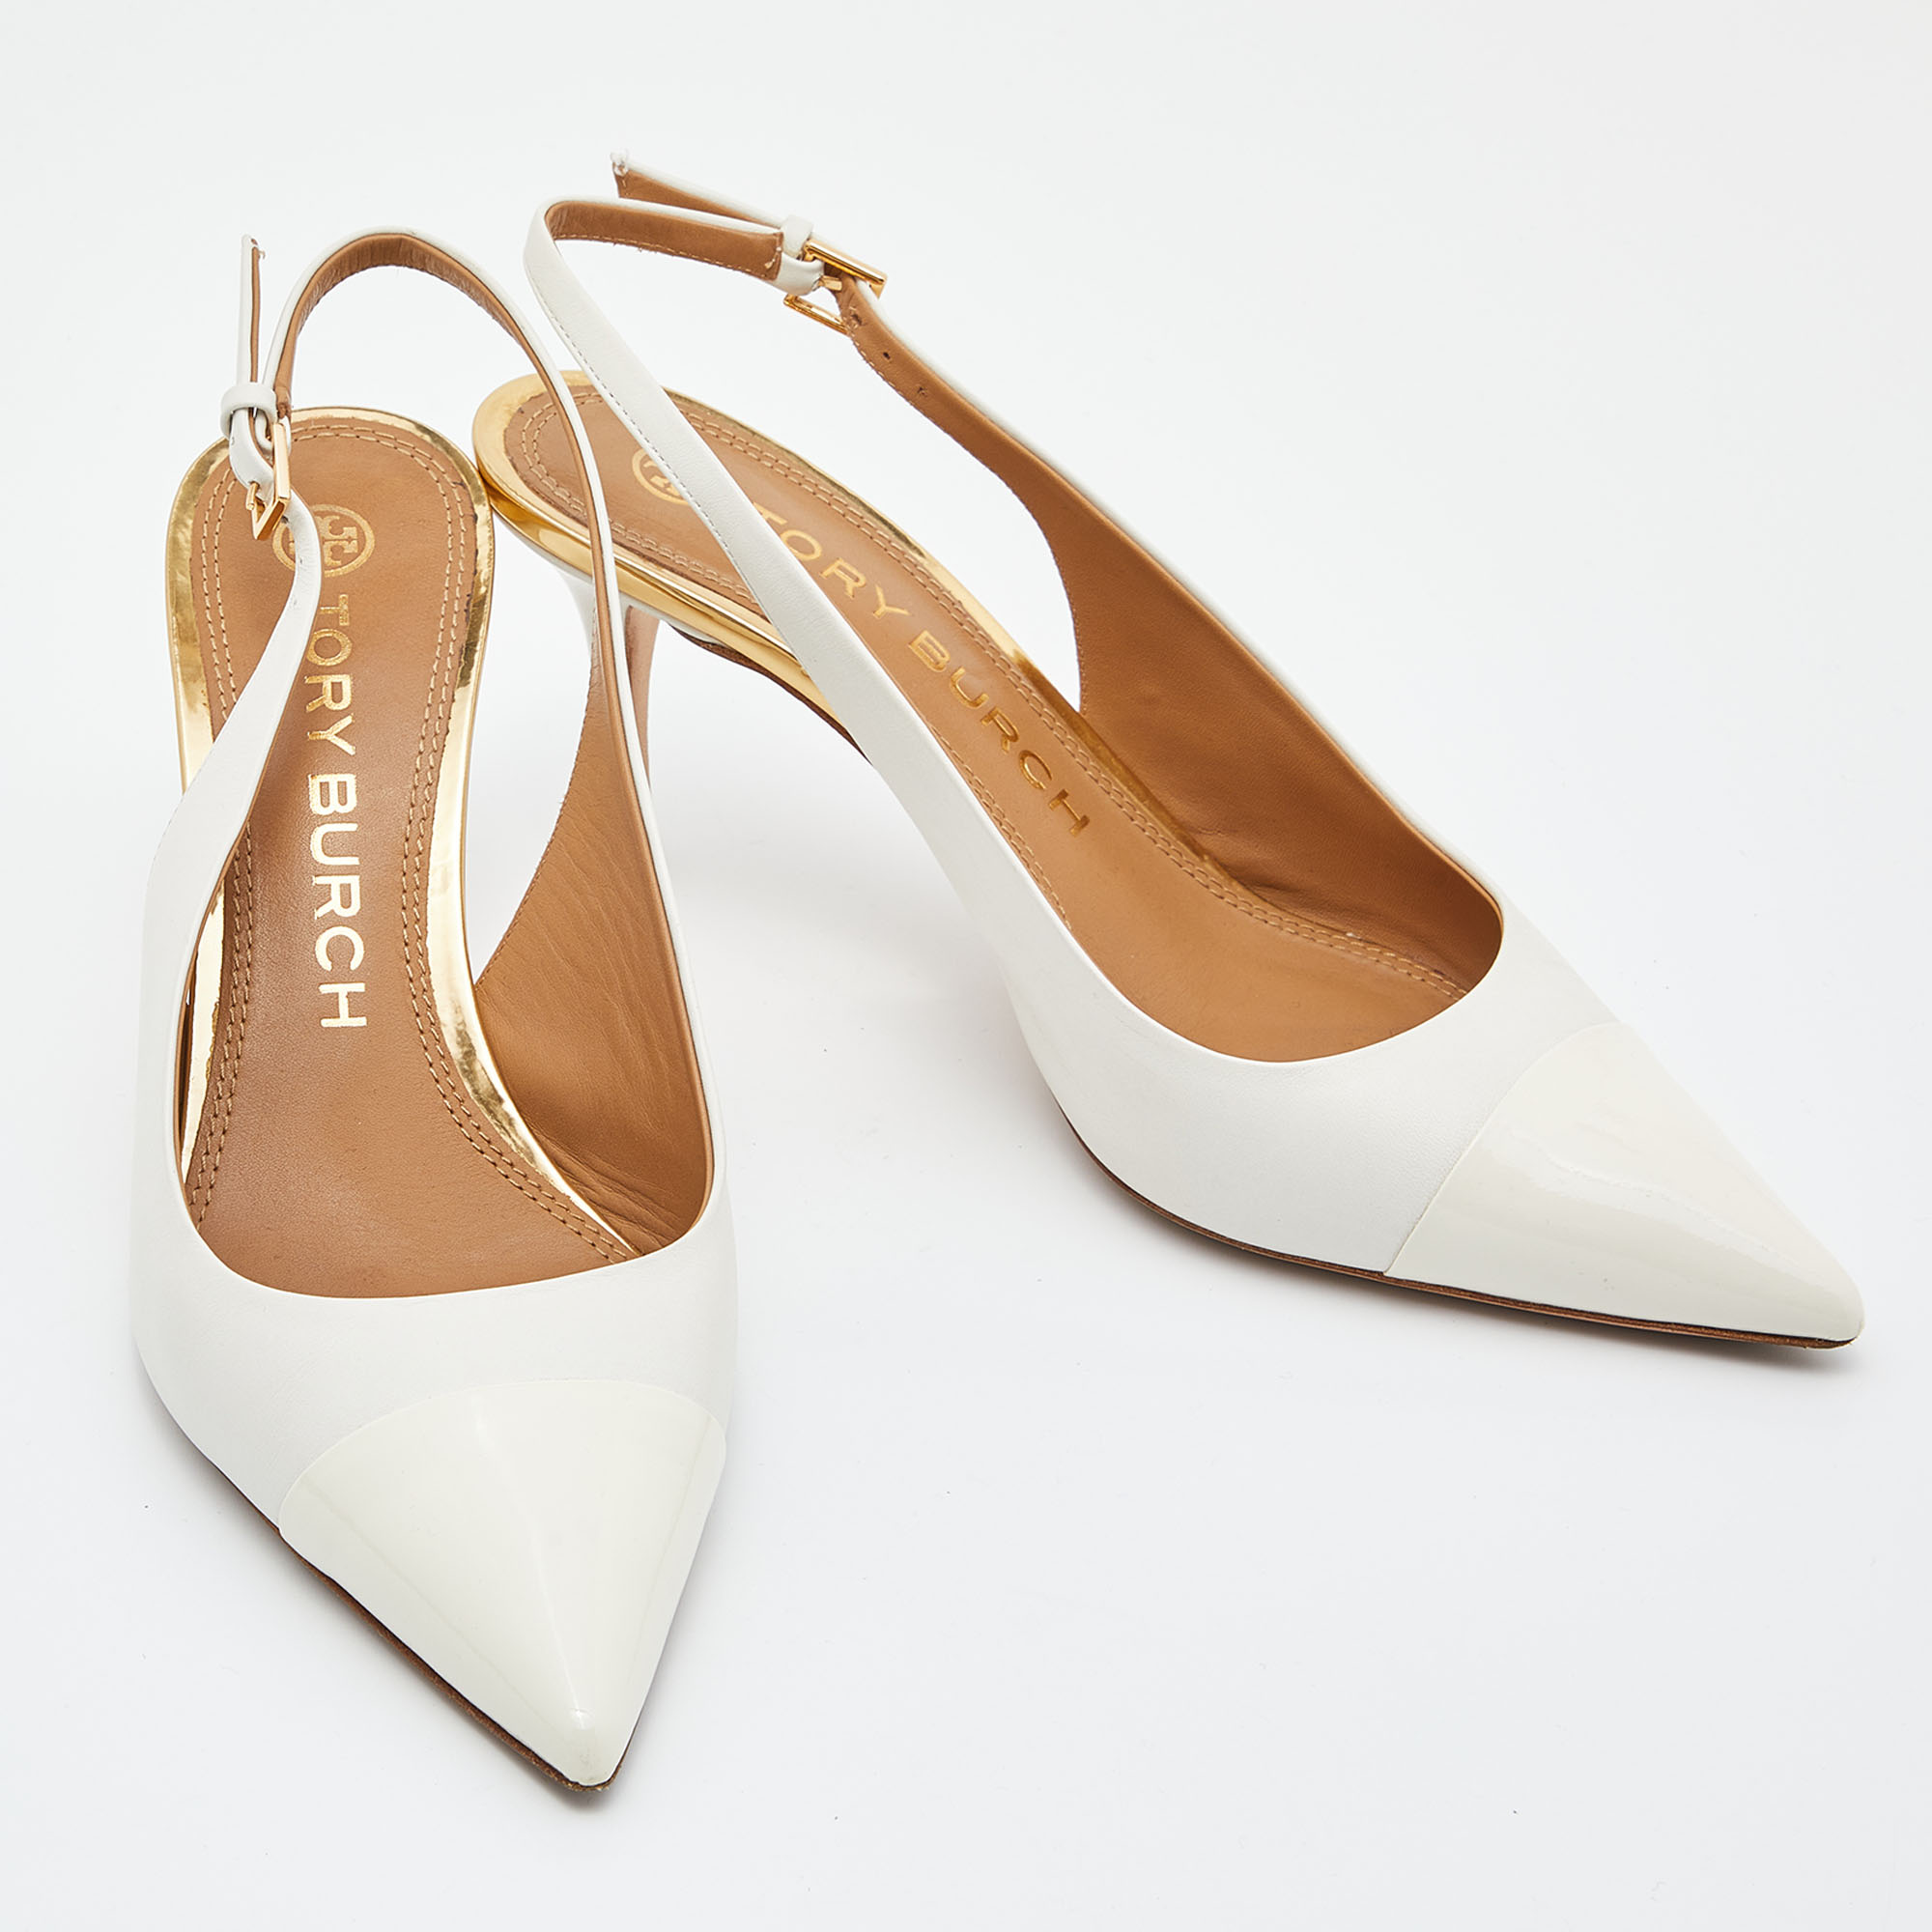 Tory Burch White Patent And Leather Penelope Slingback Pumps Size 39.5